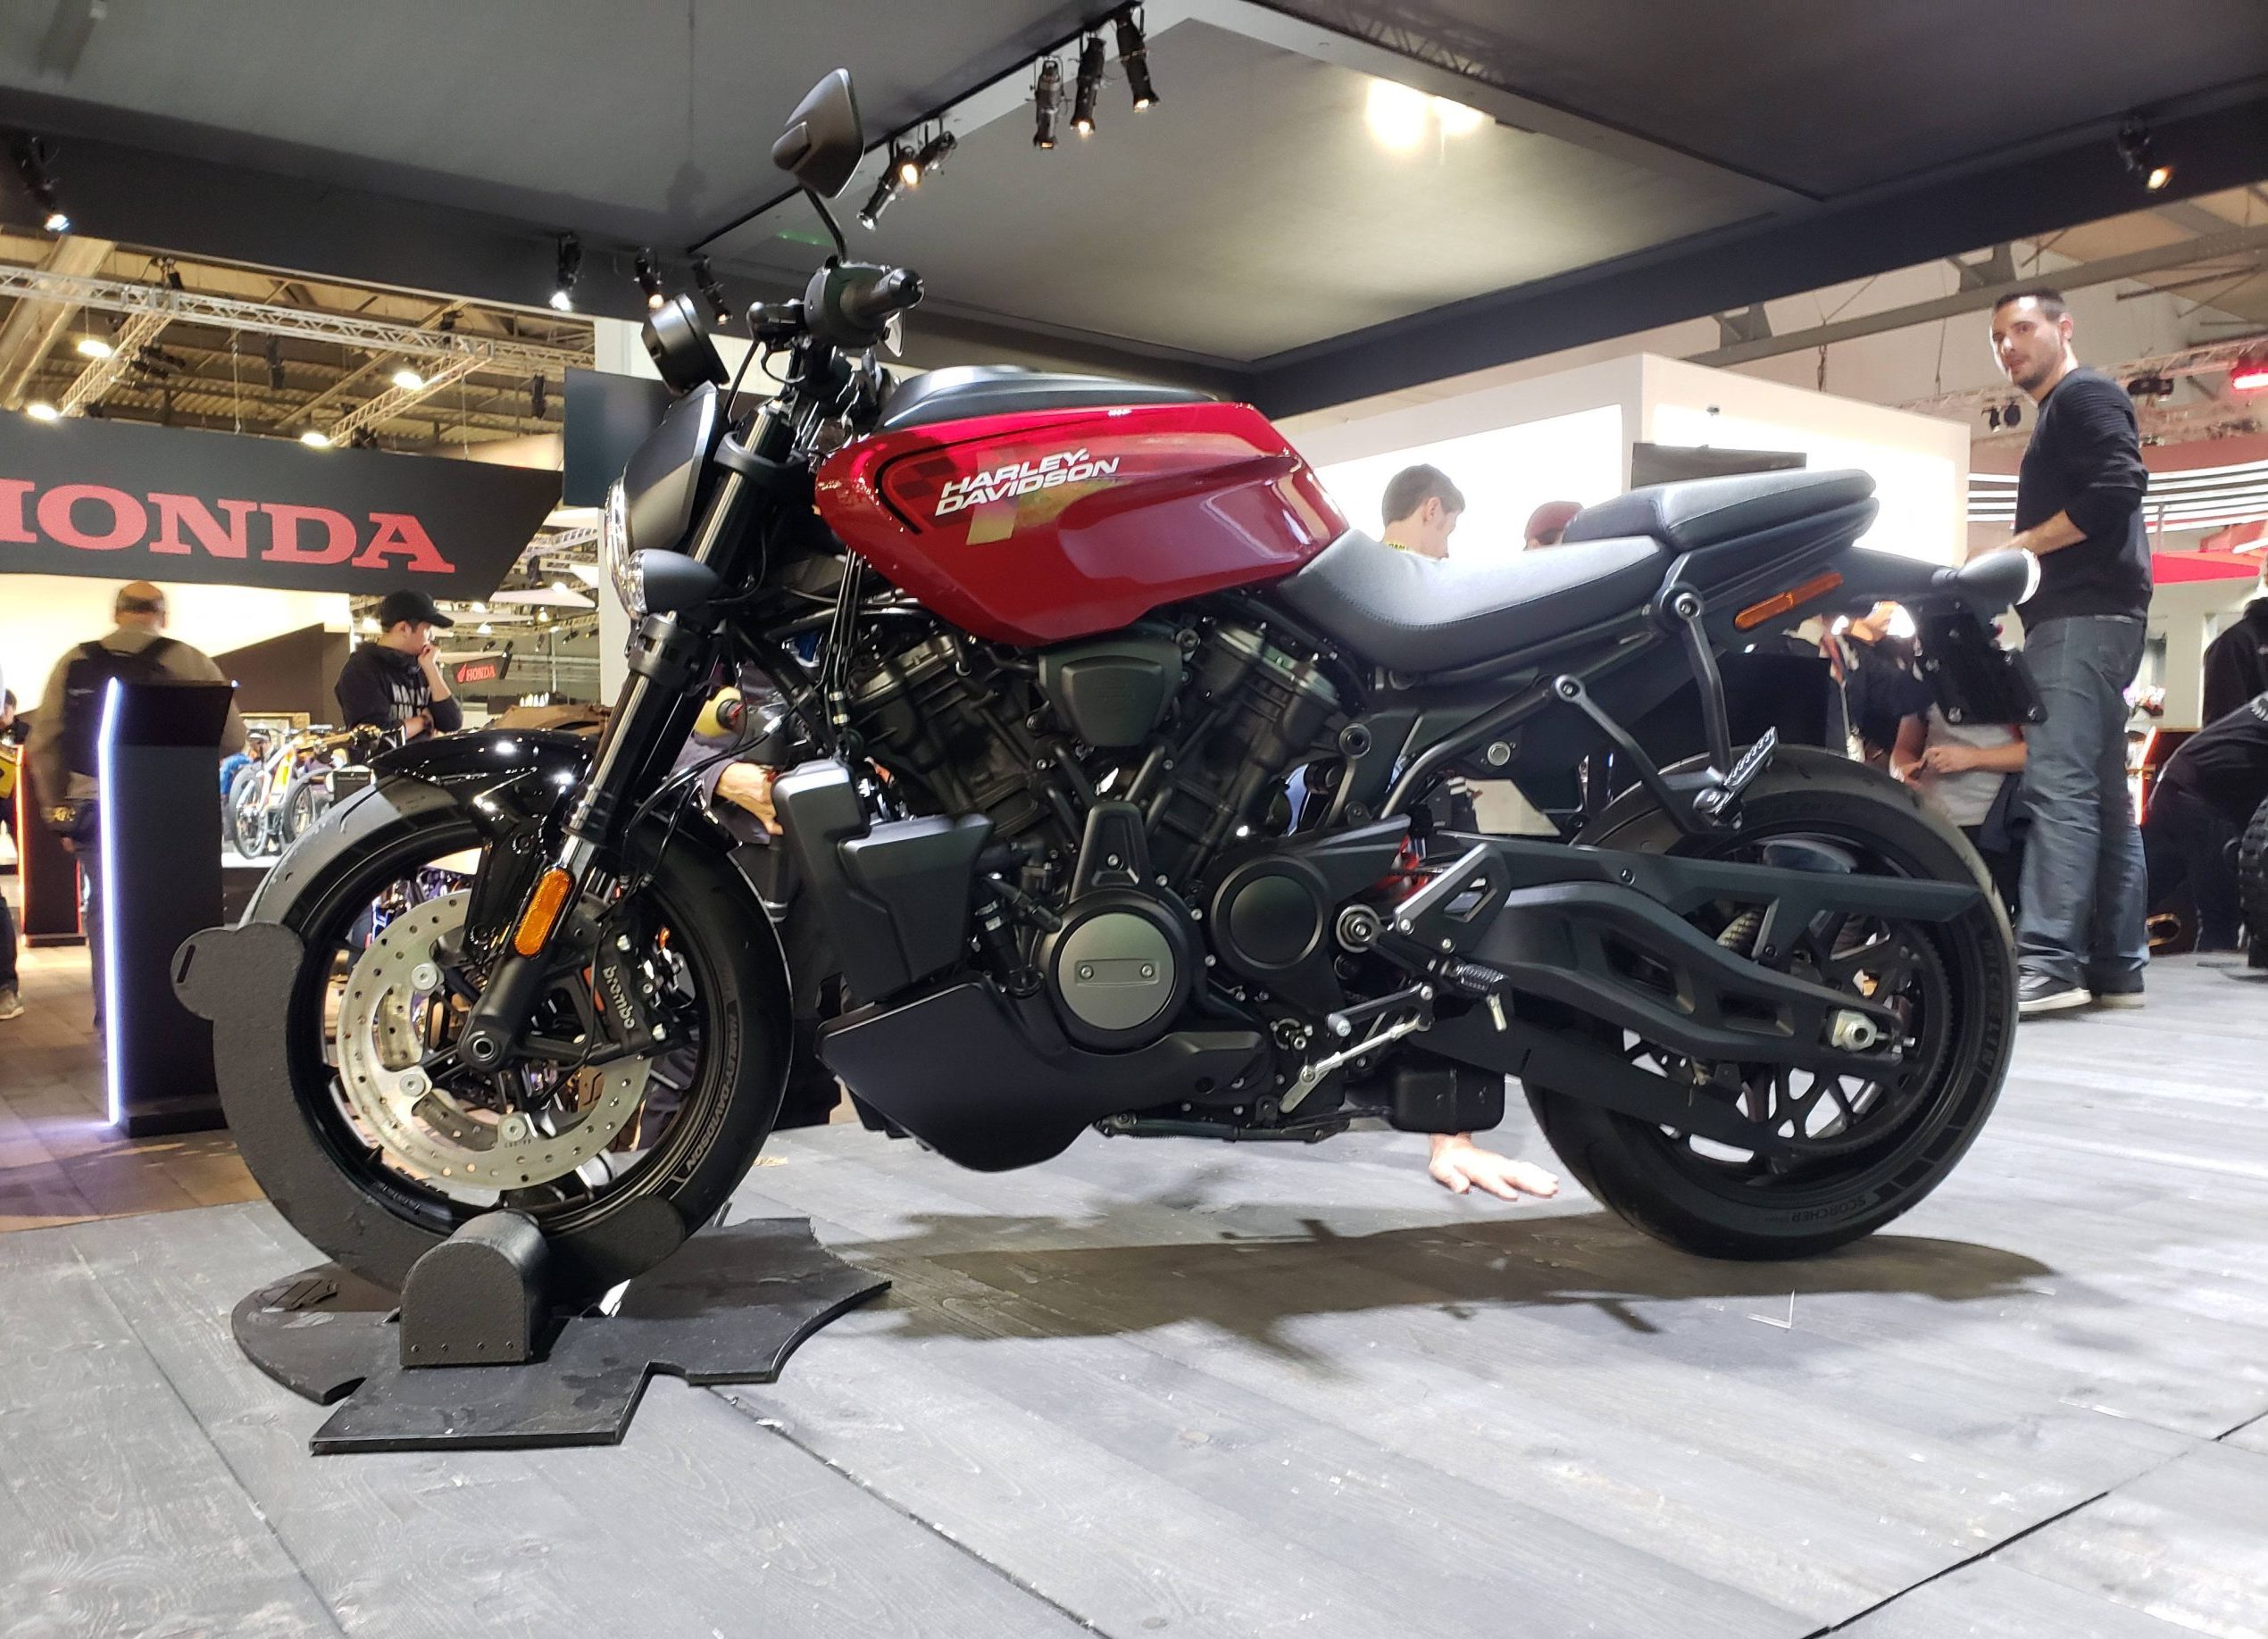 A view of the Harley-Davidson Bronx concept bike that was showed at the 2019 rendition of EICMA